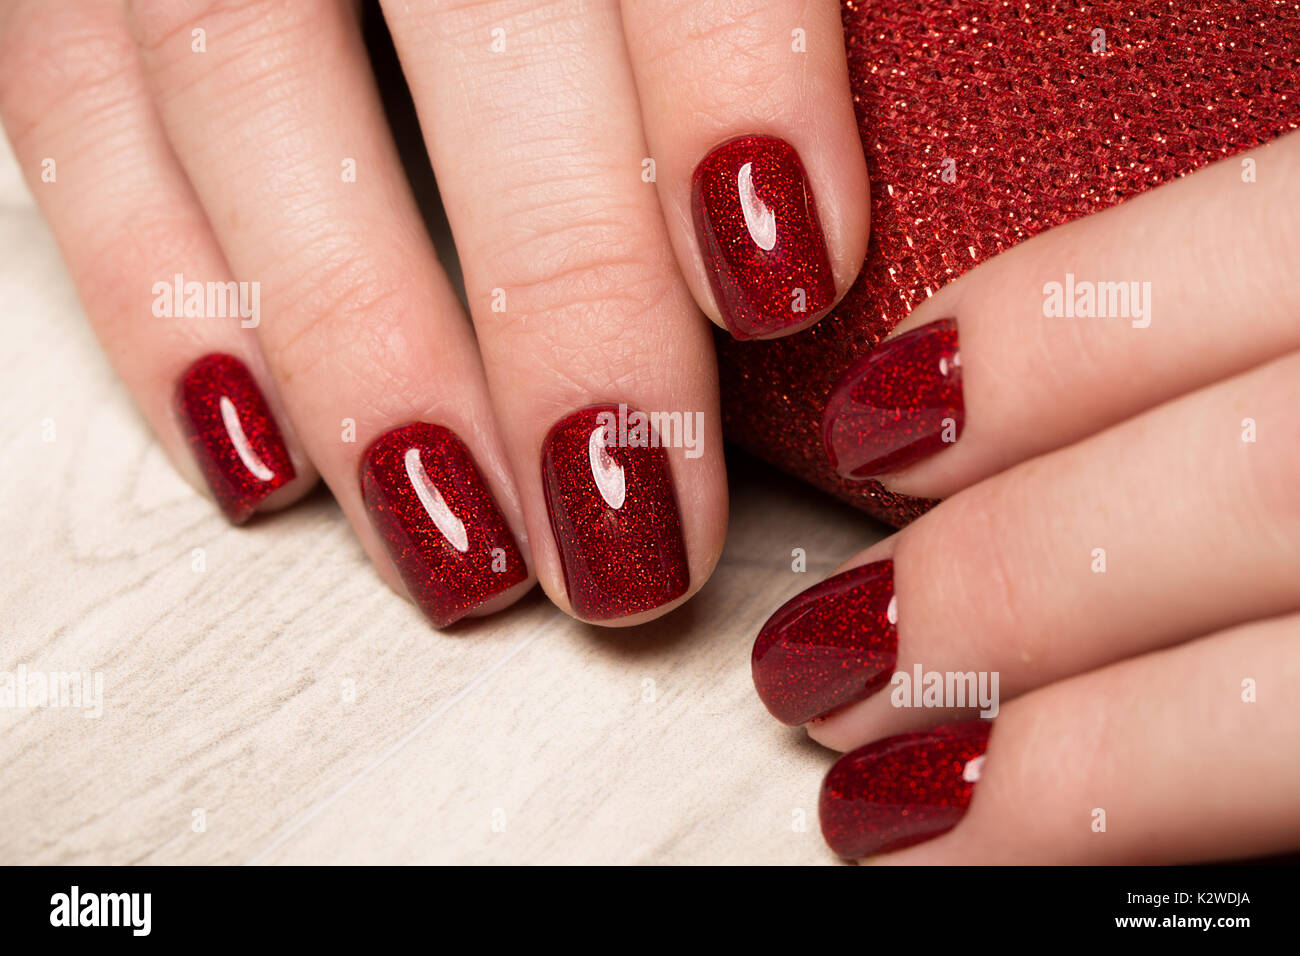 Bright festive red manicure on female hands. Nails design Stock Photo